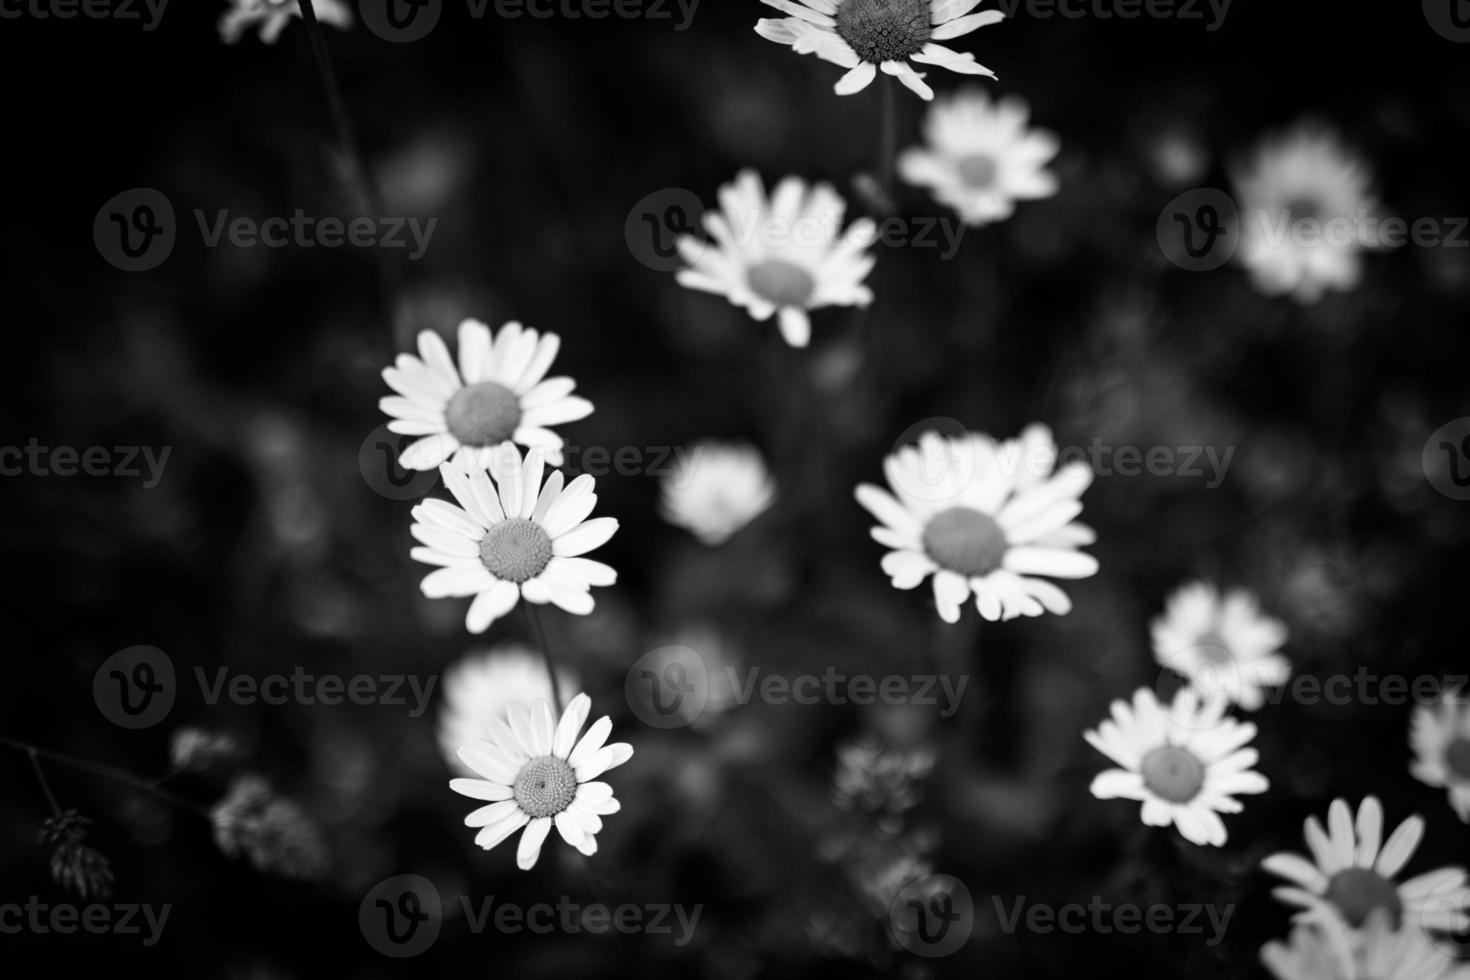 Beautiful close-up of black and white daisy flowers on artistic dark blurred background. Abstract nature white flowers and black bokeh field foliage. Beautiful monochrome daisy flower blossom photo